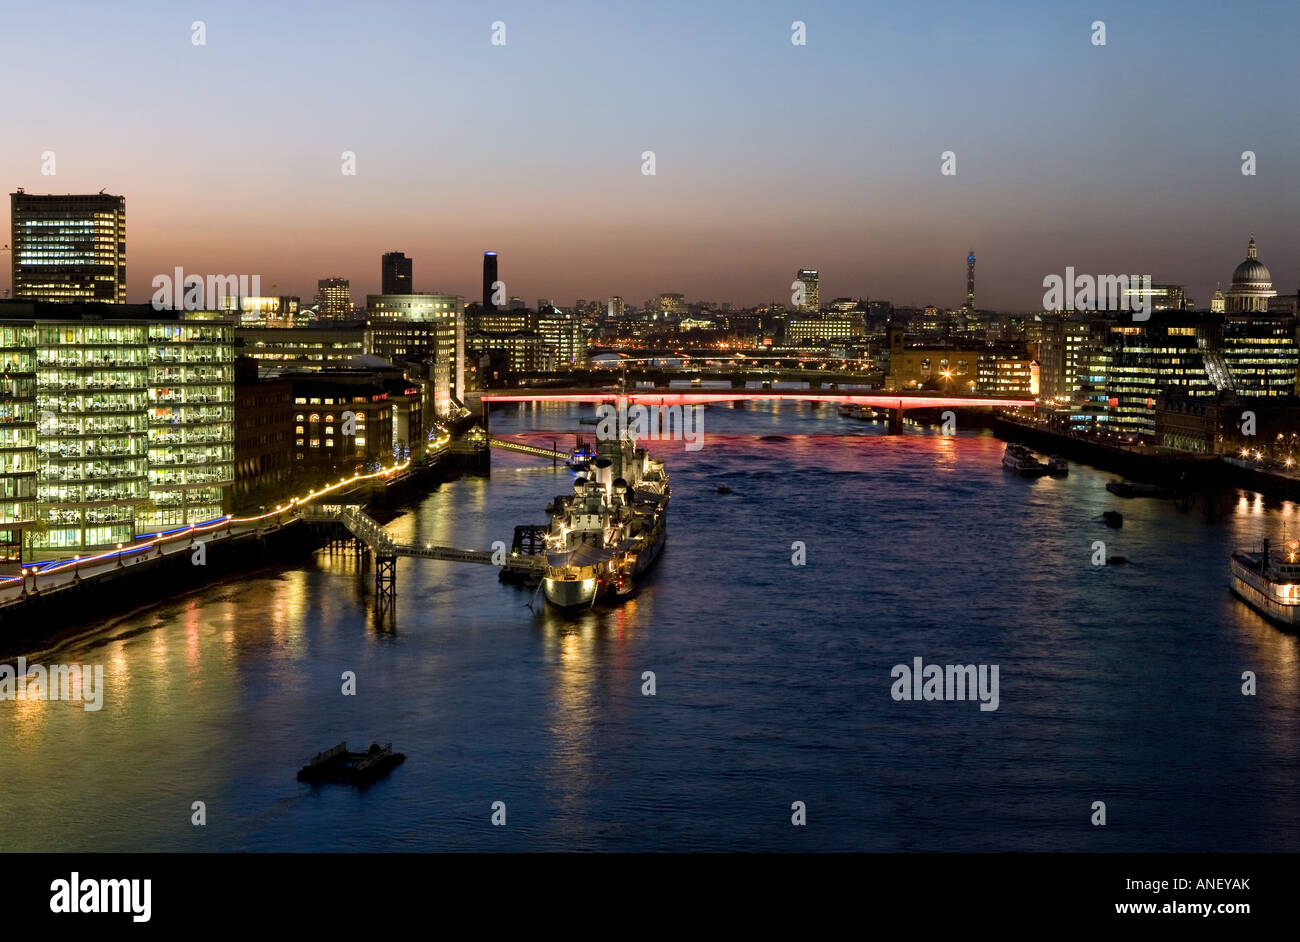 View of the River Thames from Tower Bridge in London. Stock Photo